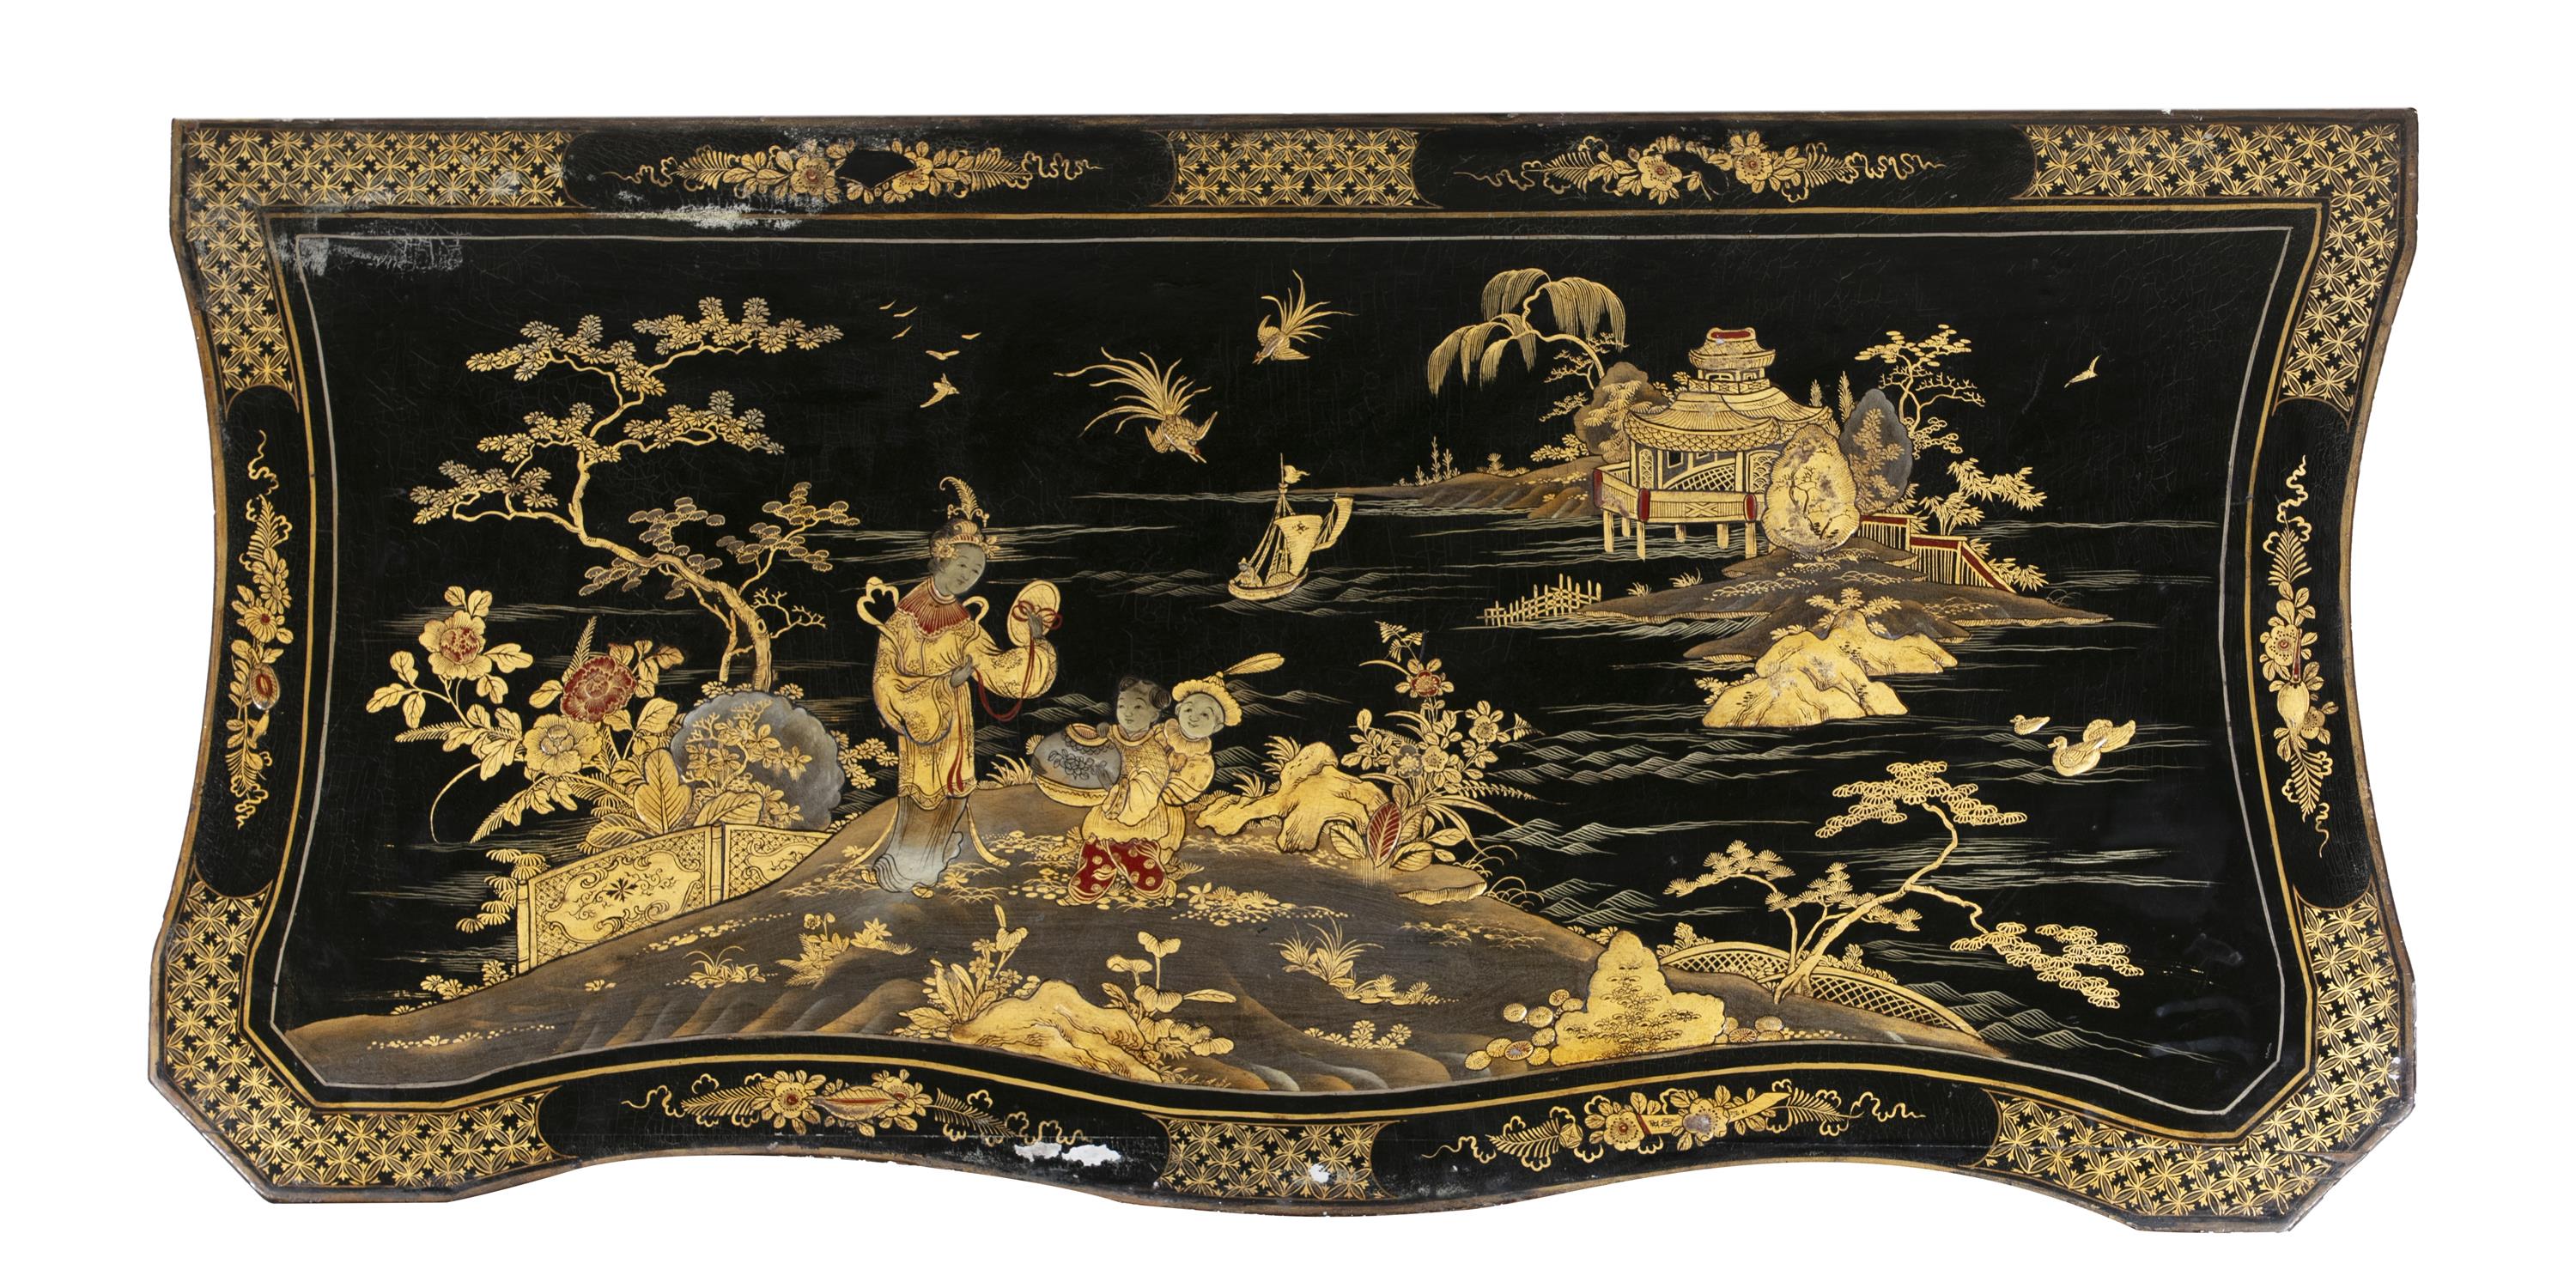 A GEORGE III JAPANNED SERPENTINE SIDE TABLE, LATE 18TH CENTURY, the top decorated depicting - Image 4 of 13